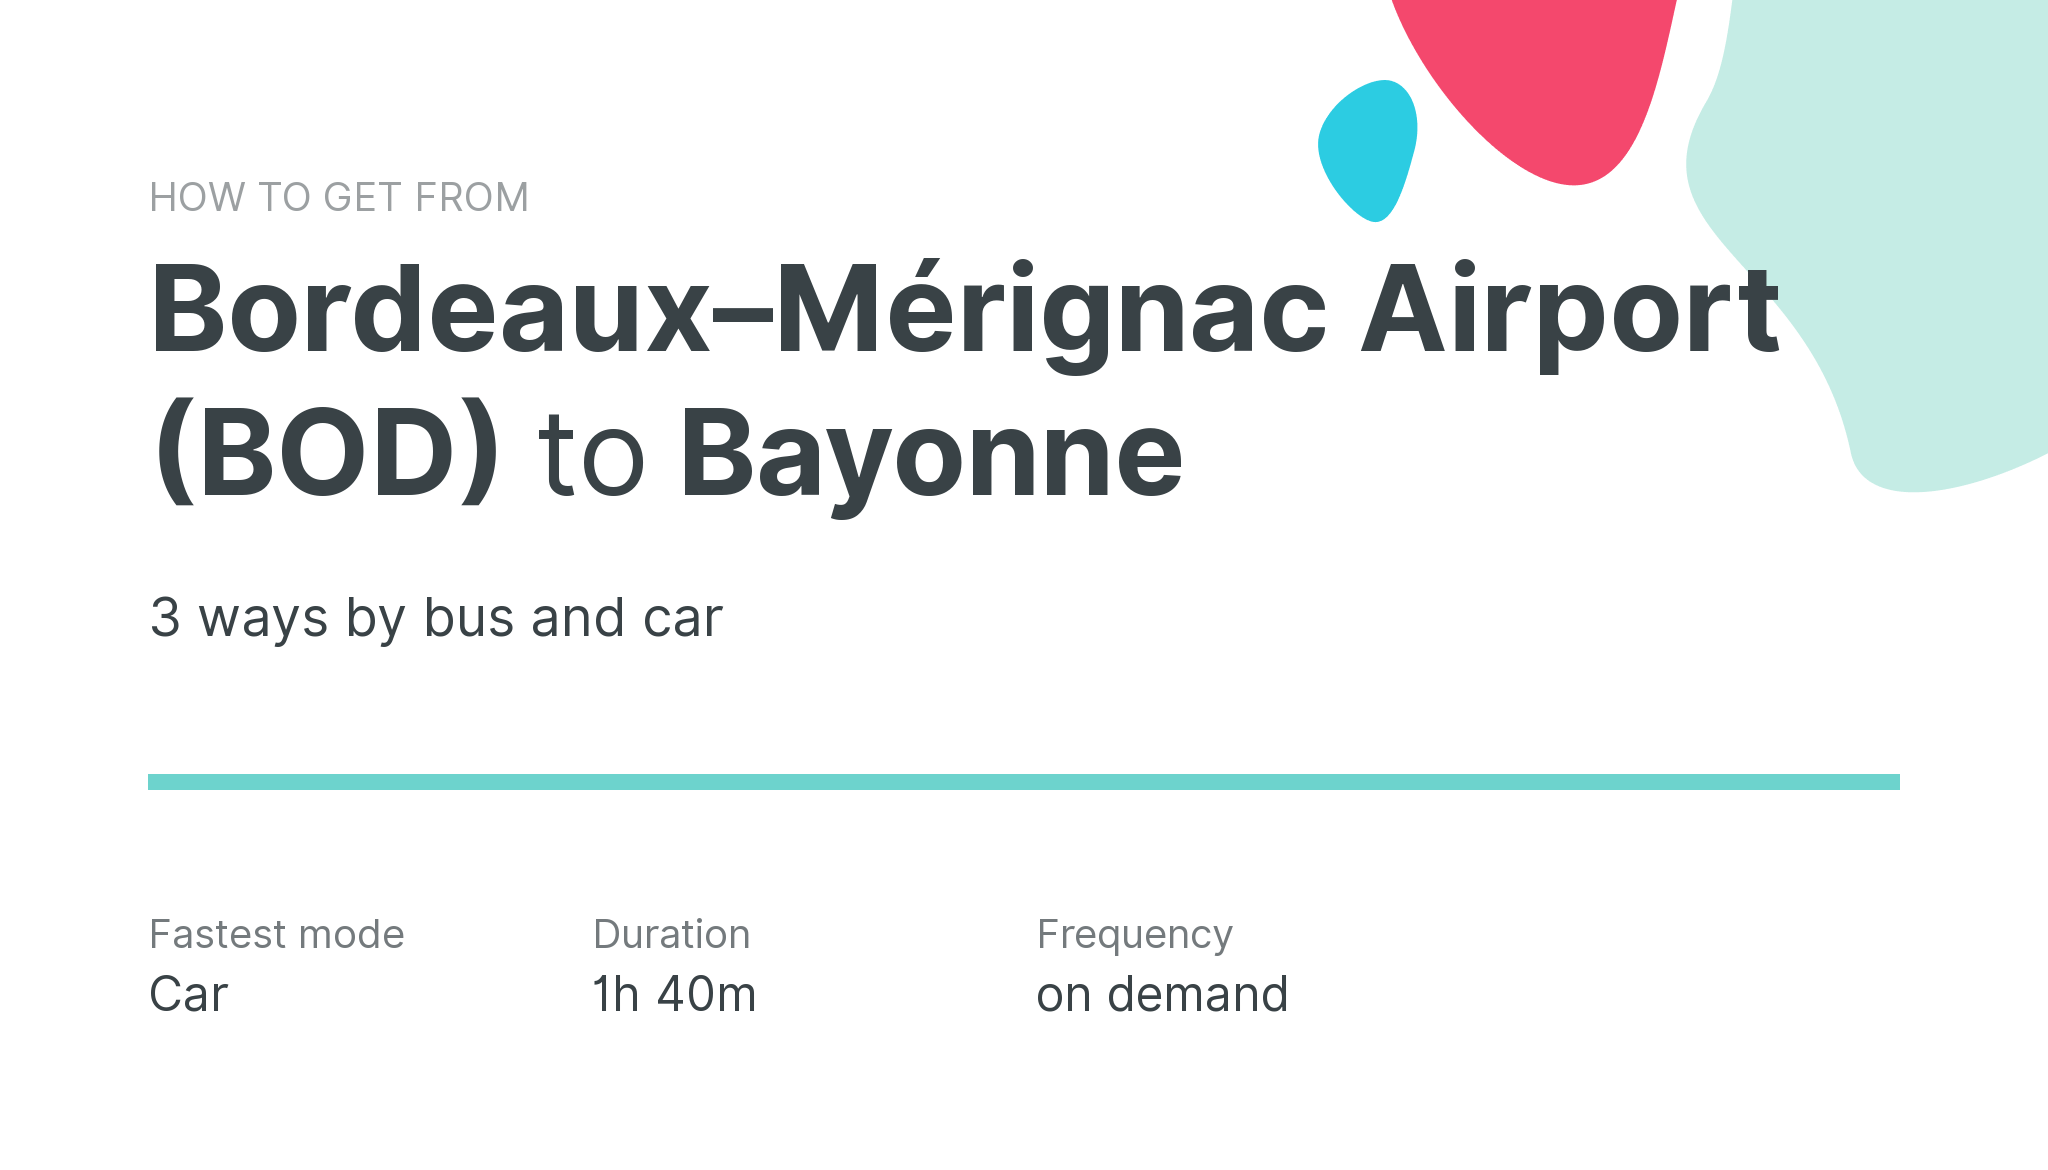 How do I get from Bordeaux–Mérignac Airport (BOD) to Bayonne